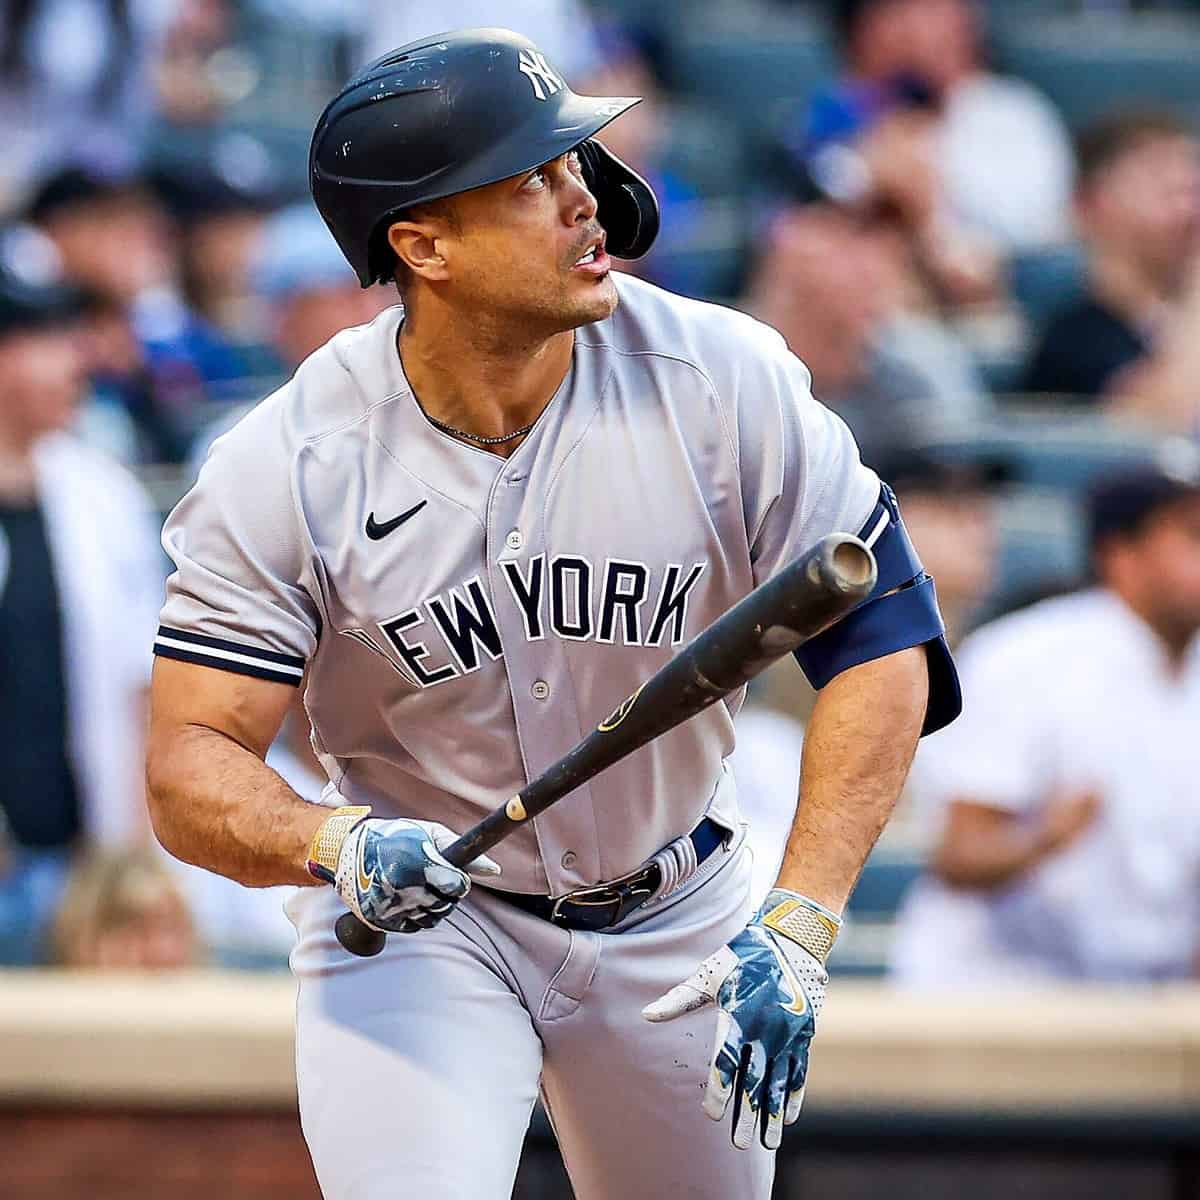 Slugger Giancarlo Stanton recommends playing multiple sports in